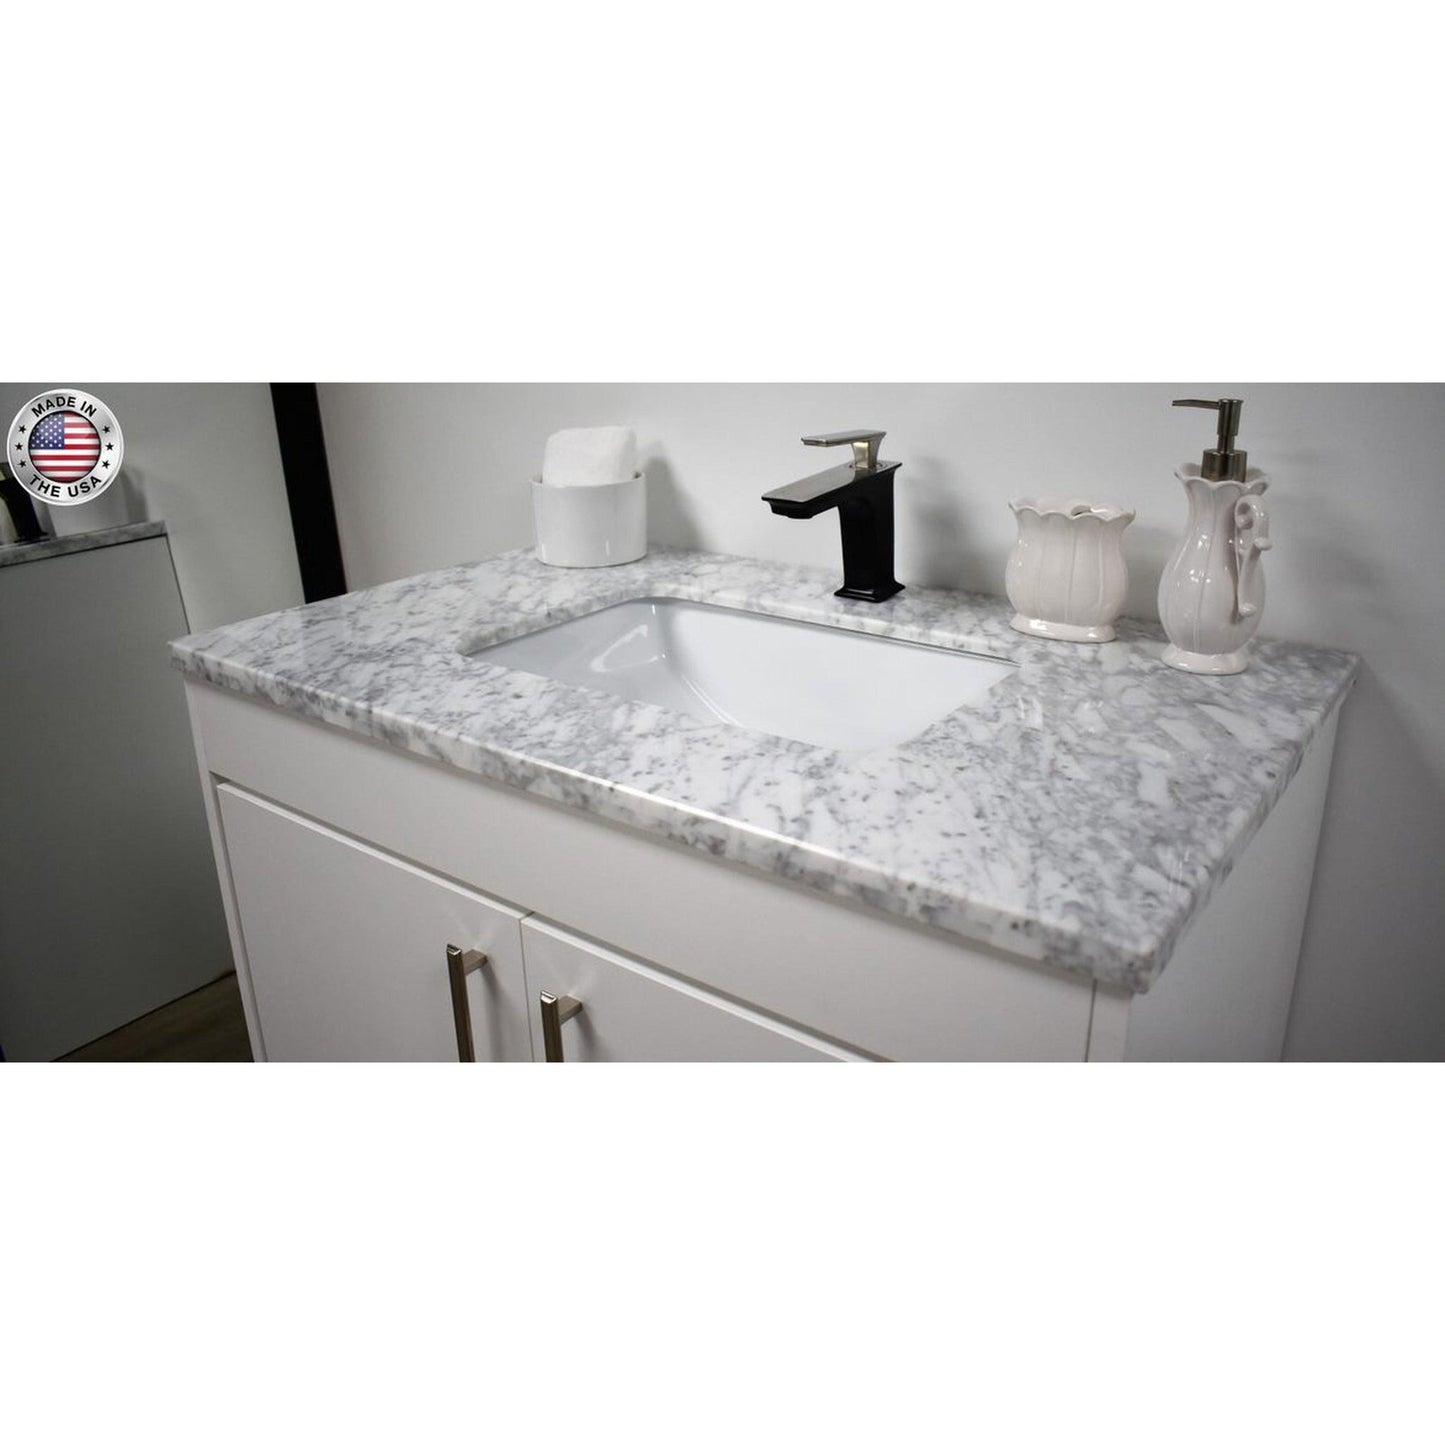 Volpa USA Capri 36" x 22" White Freestanding Modern Bathroom Vanity With Preinstalled Undermount Sink And Carrara Marble top With Brushed Nickel Edge Handles